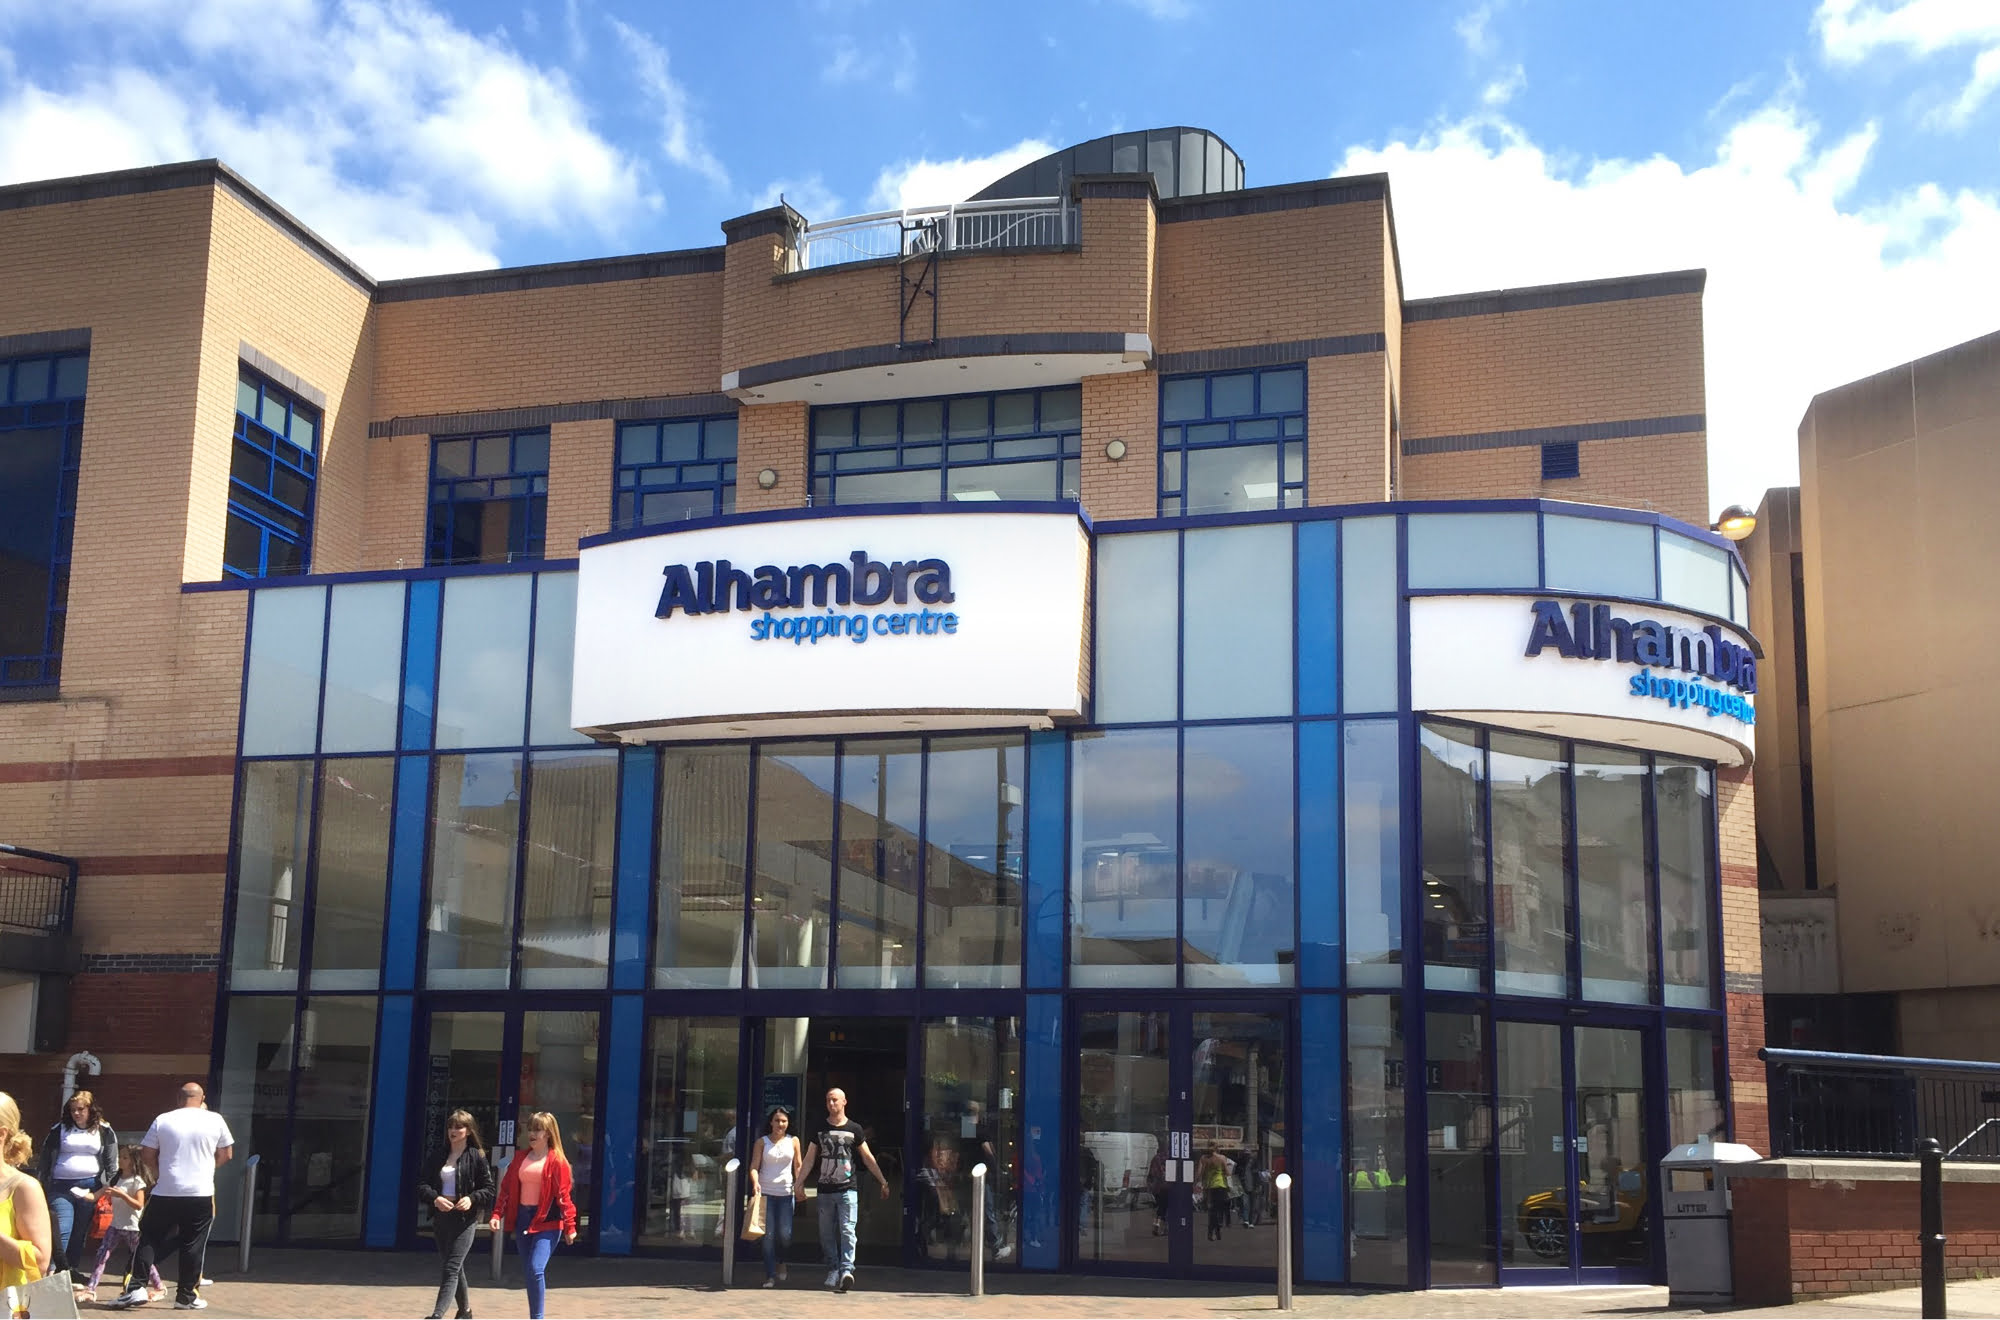 Front of Alhambra Shopping Centre